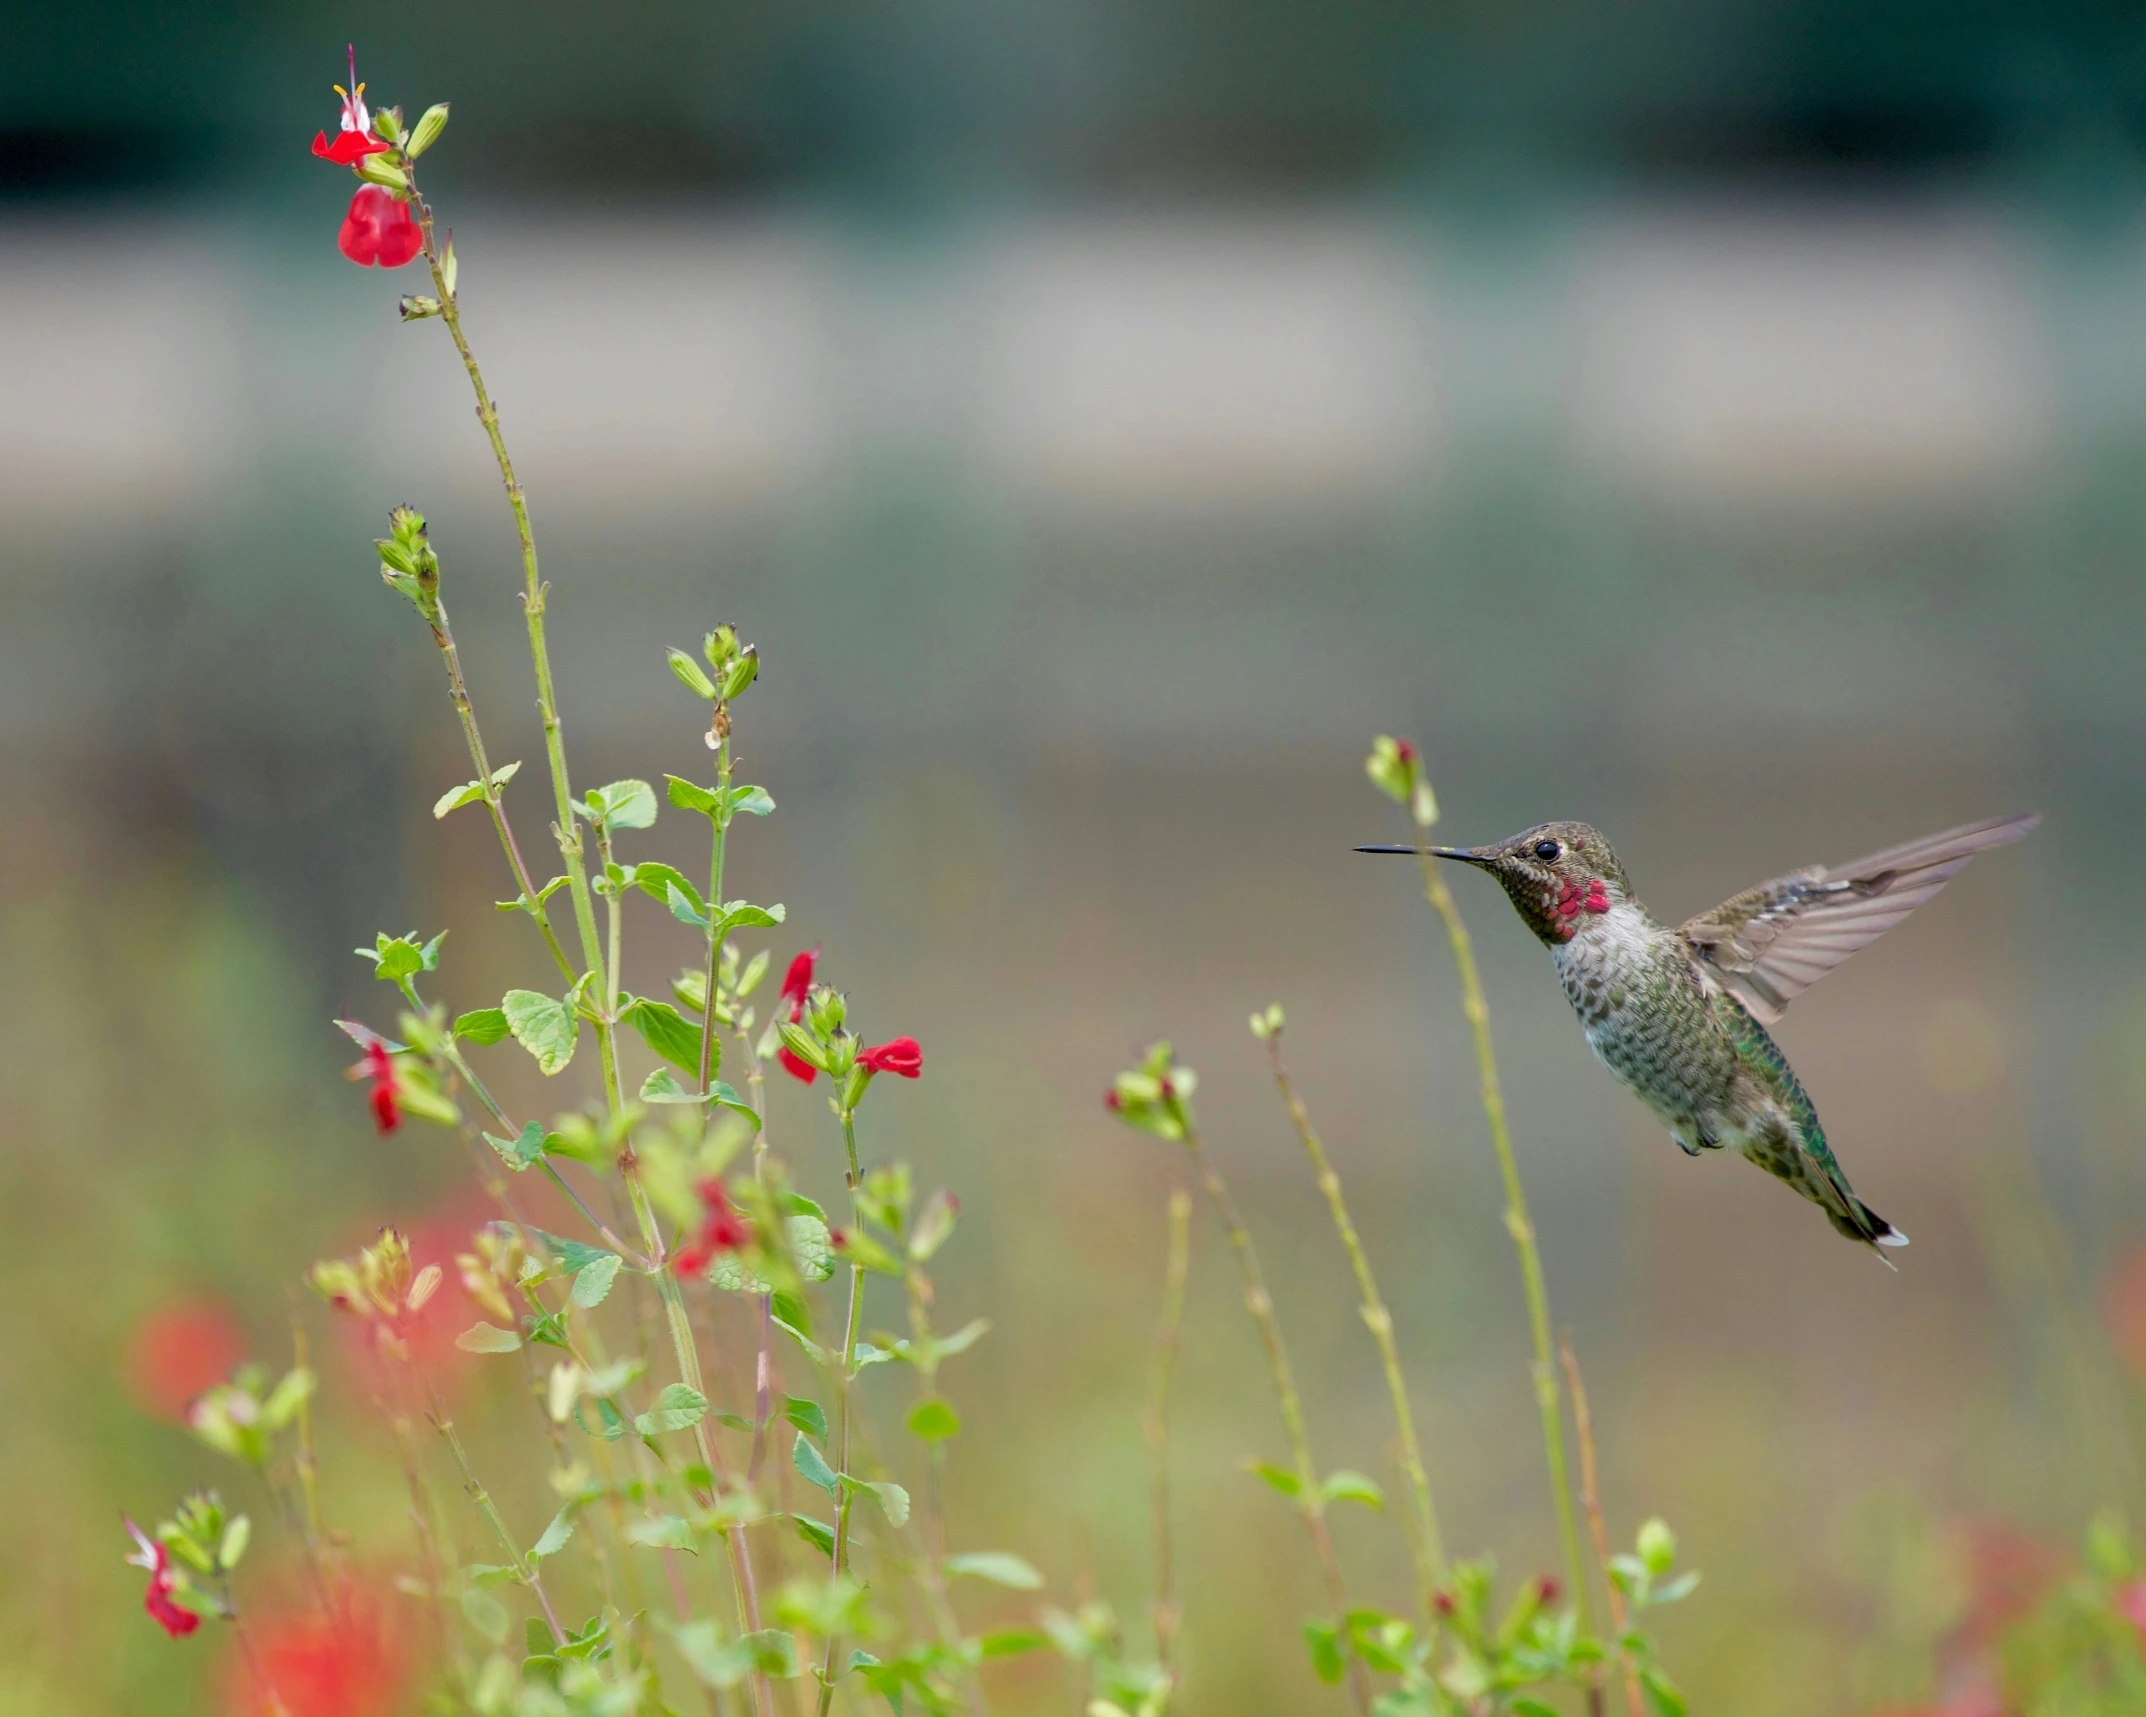 a hummingbird flying close to the camera in front of some flowers